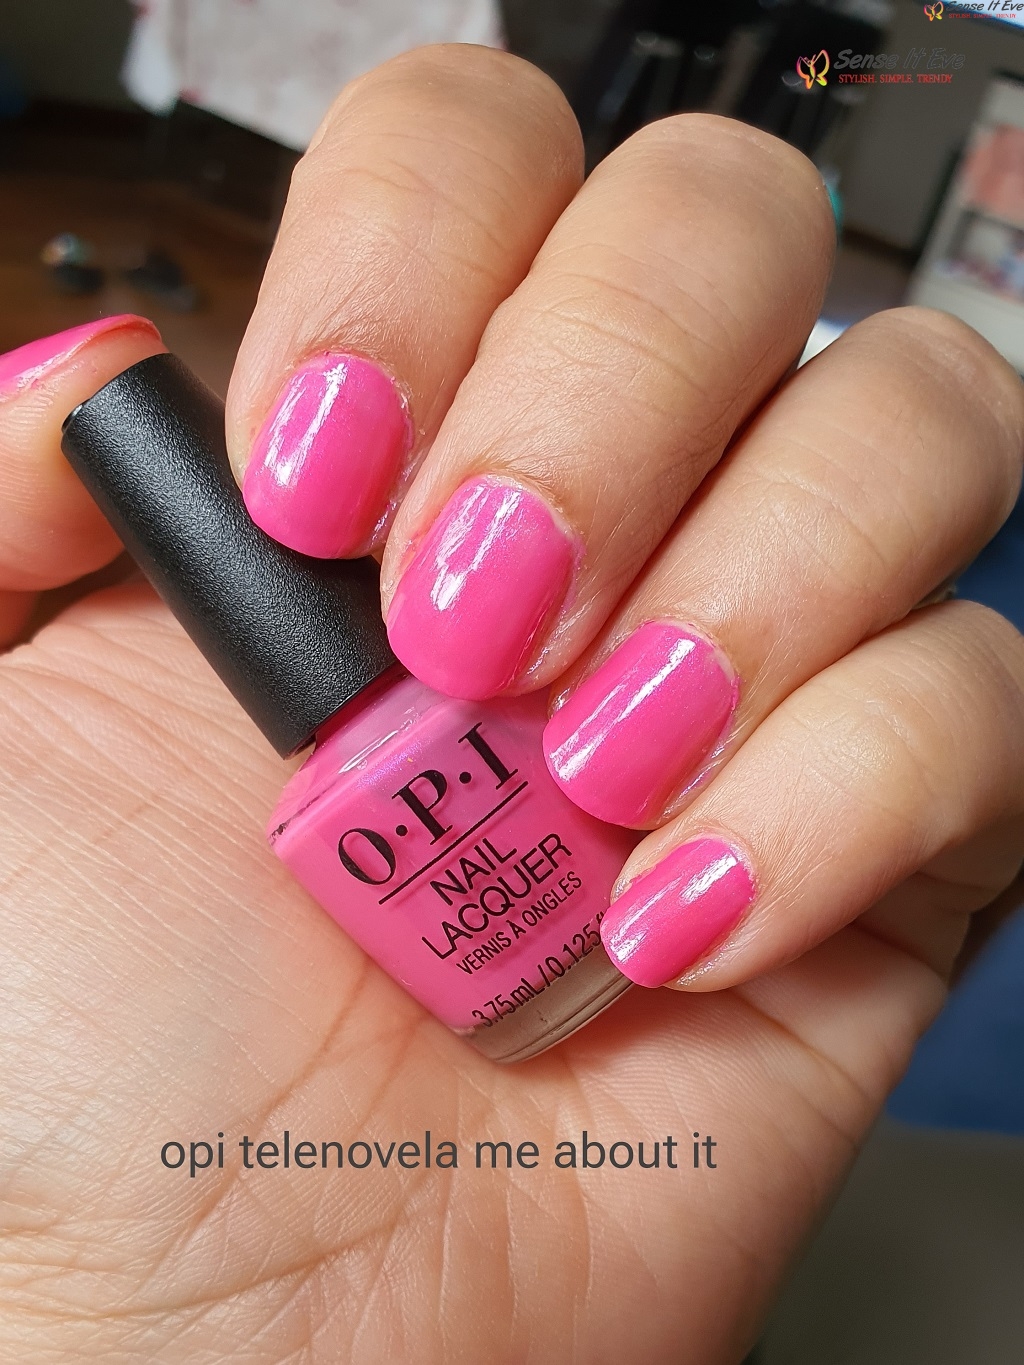 OPI Telenovela Me About It Swatches Sense It Eve OPI Mexico City Collection Mini Set Review